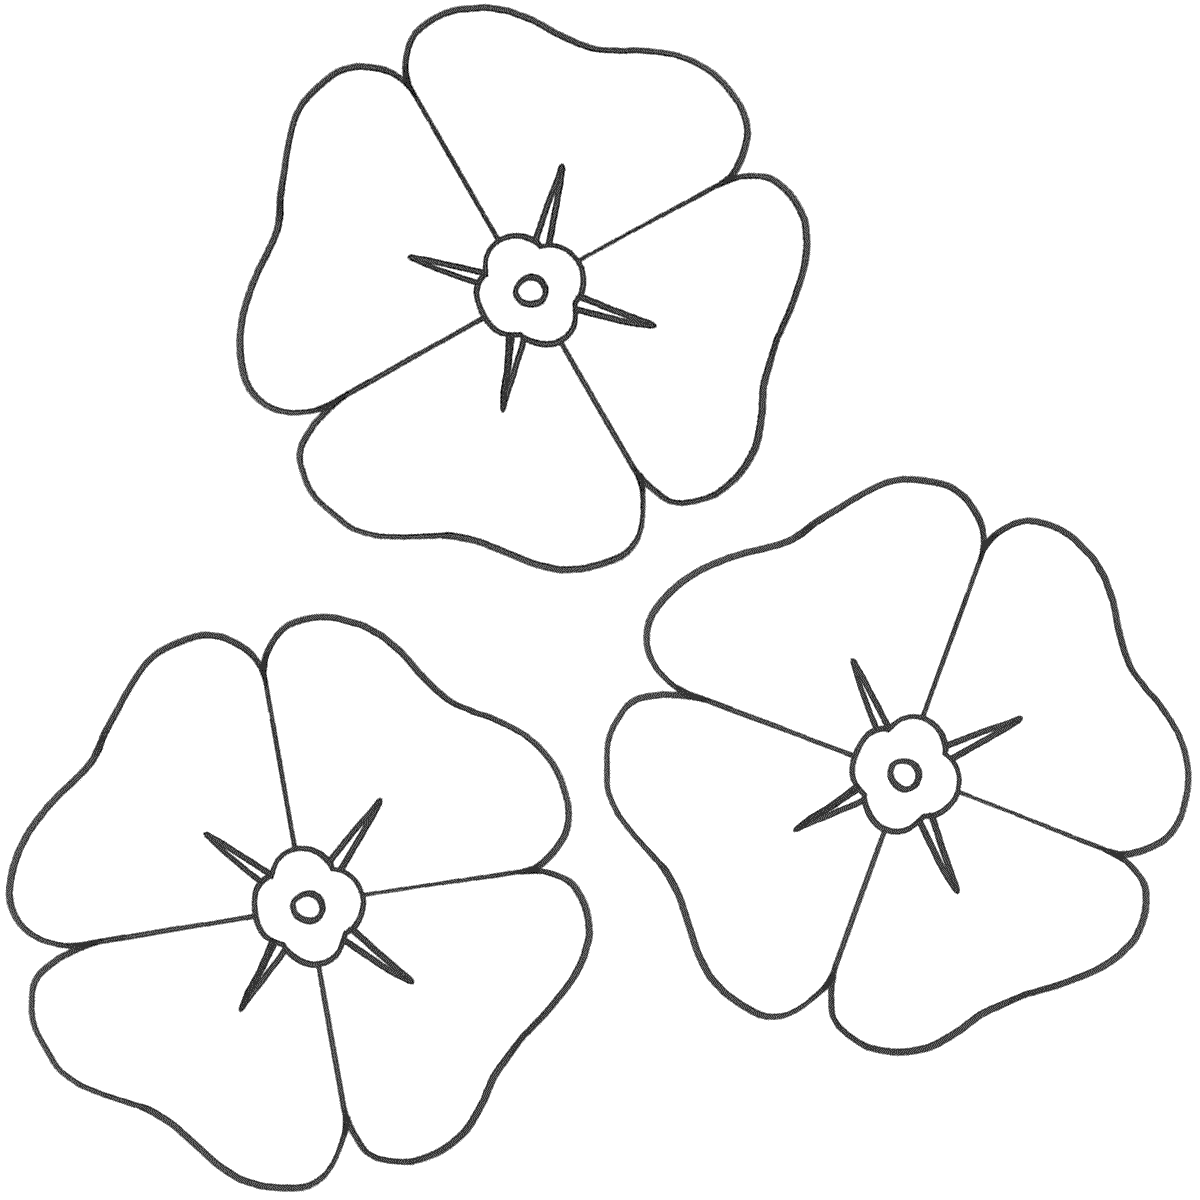 Poppy coloring #15, Download drawings